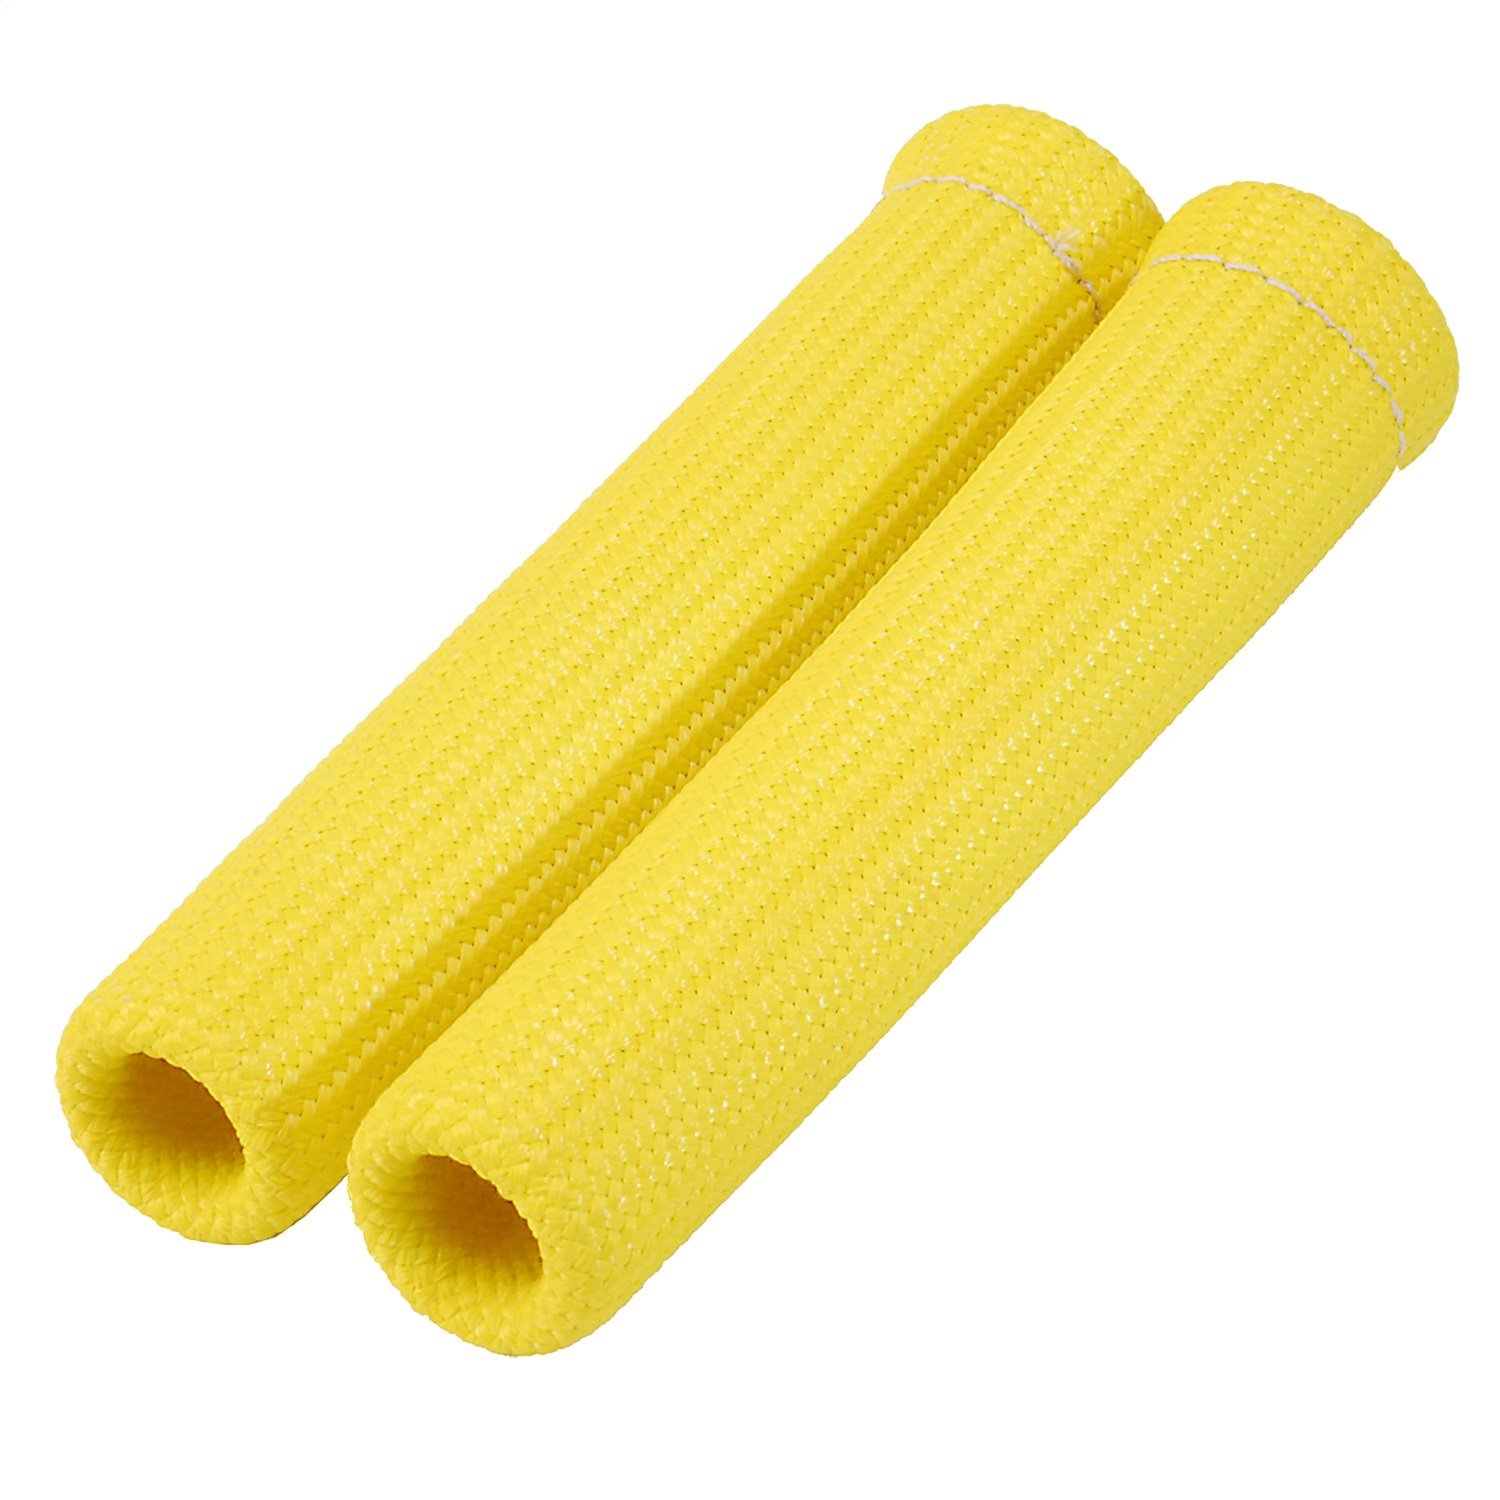 YELLOW PROTECT-A-BOOT 2PK